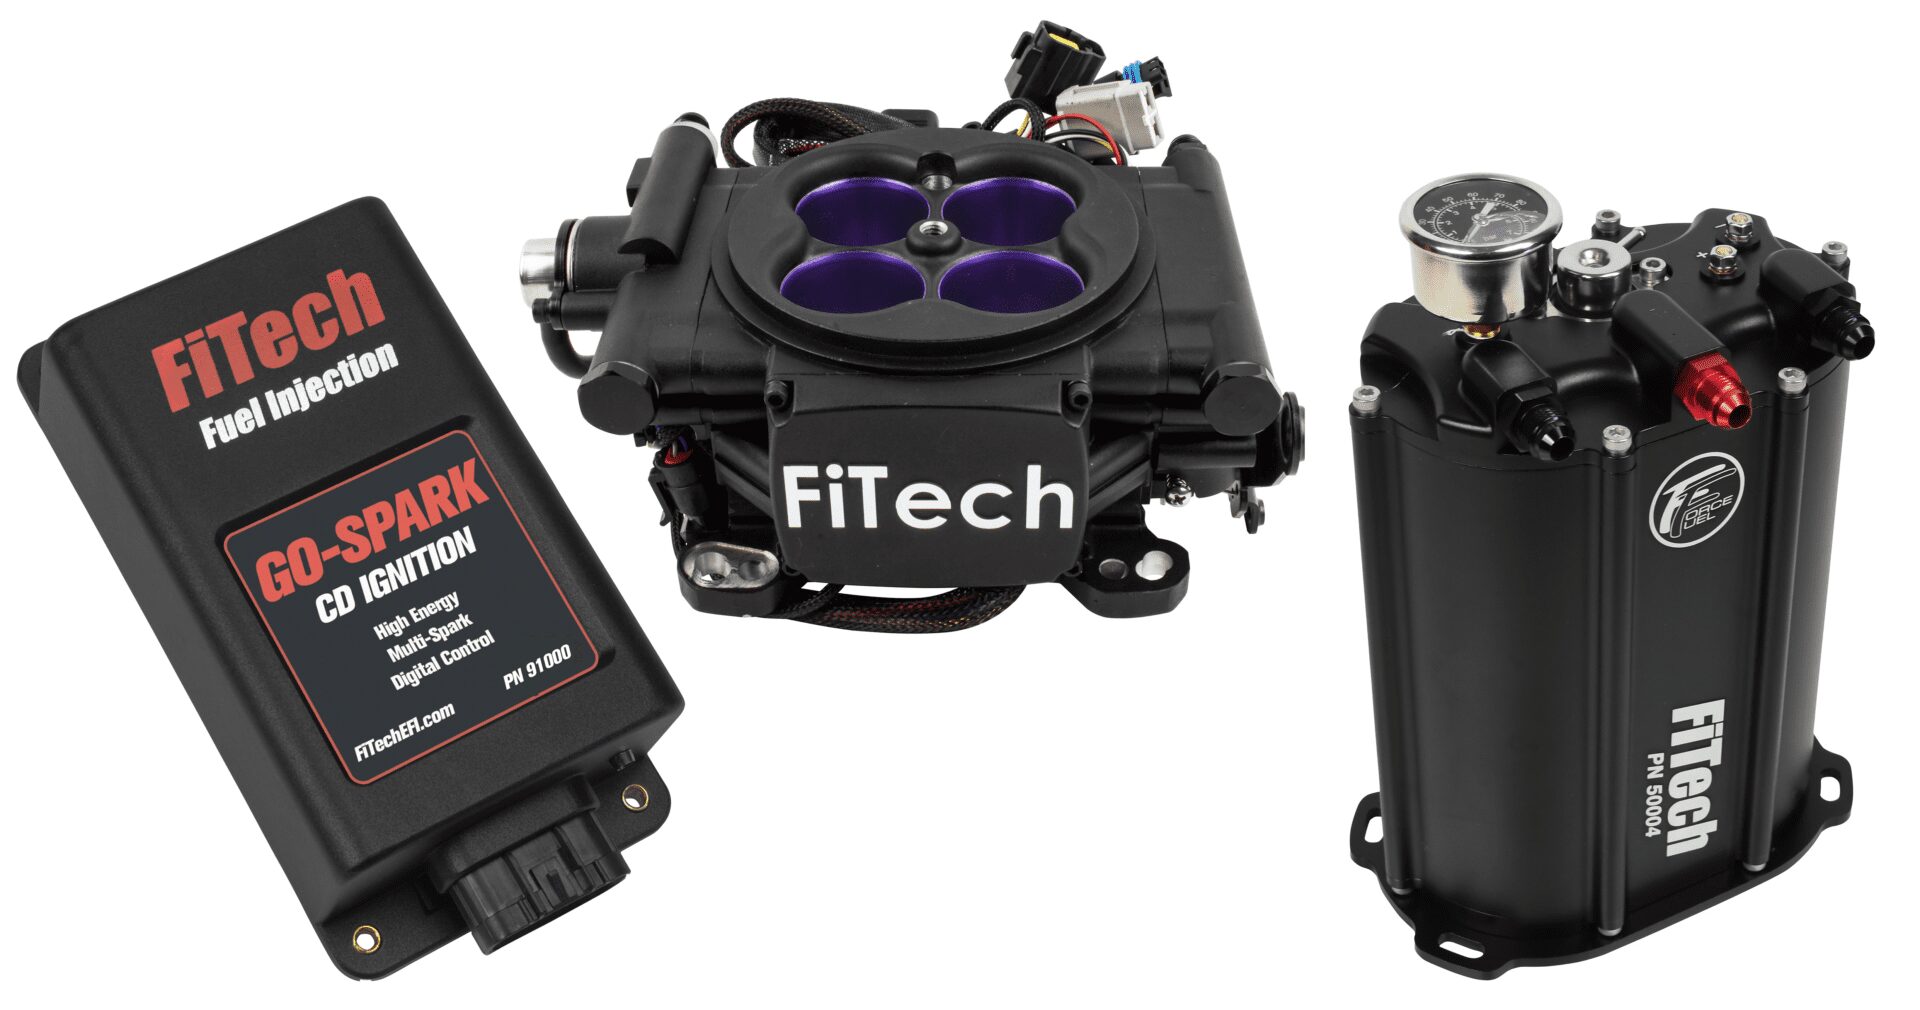 FiTech 93508 Mean Street EFI System Master Kit w/ Force Fuel, Fuel Delivery System, w/CDI box